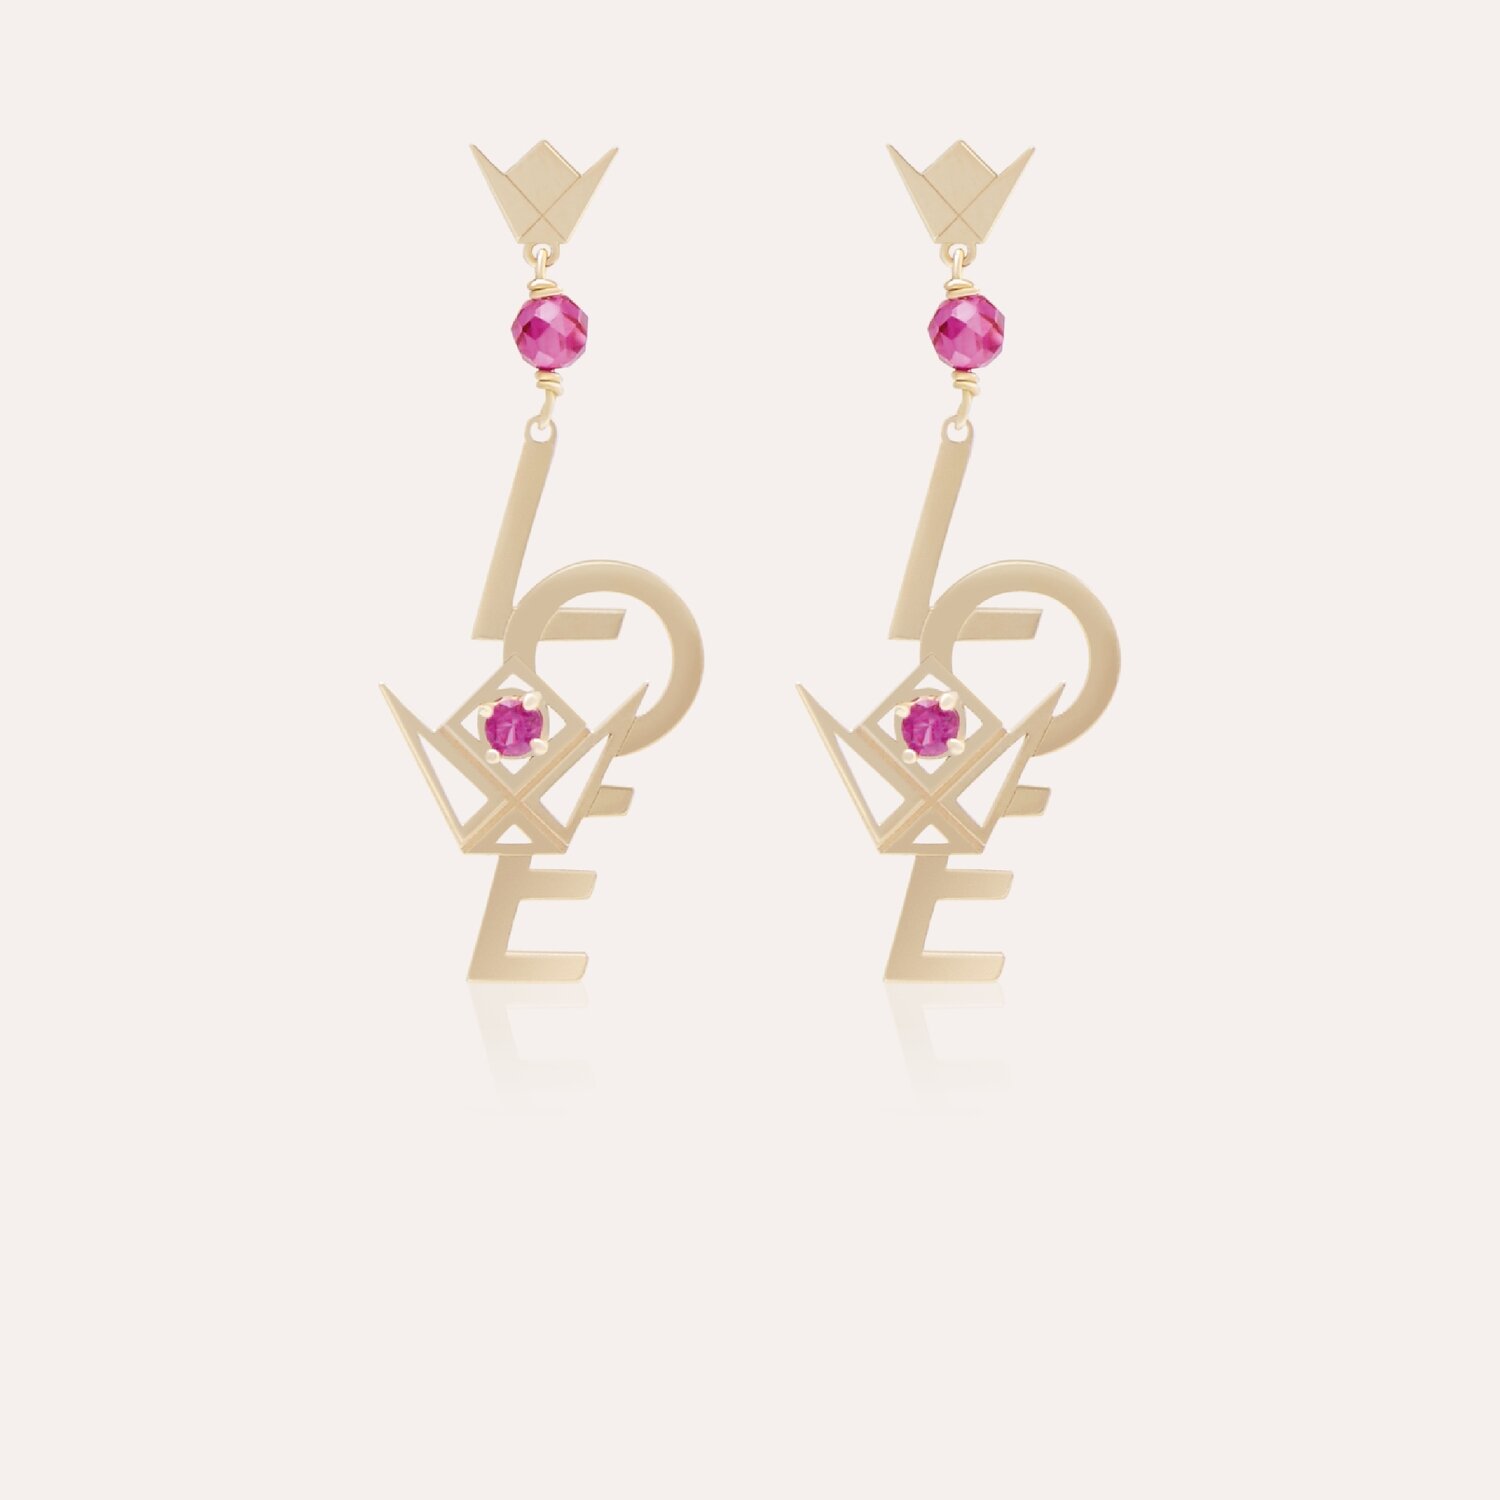 Emblem Love Gold Earrings with Colored Stones